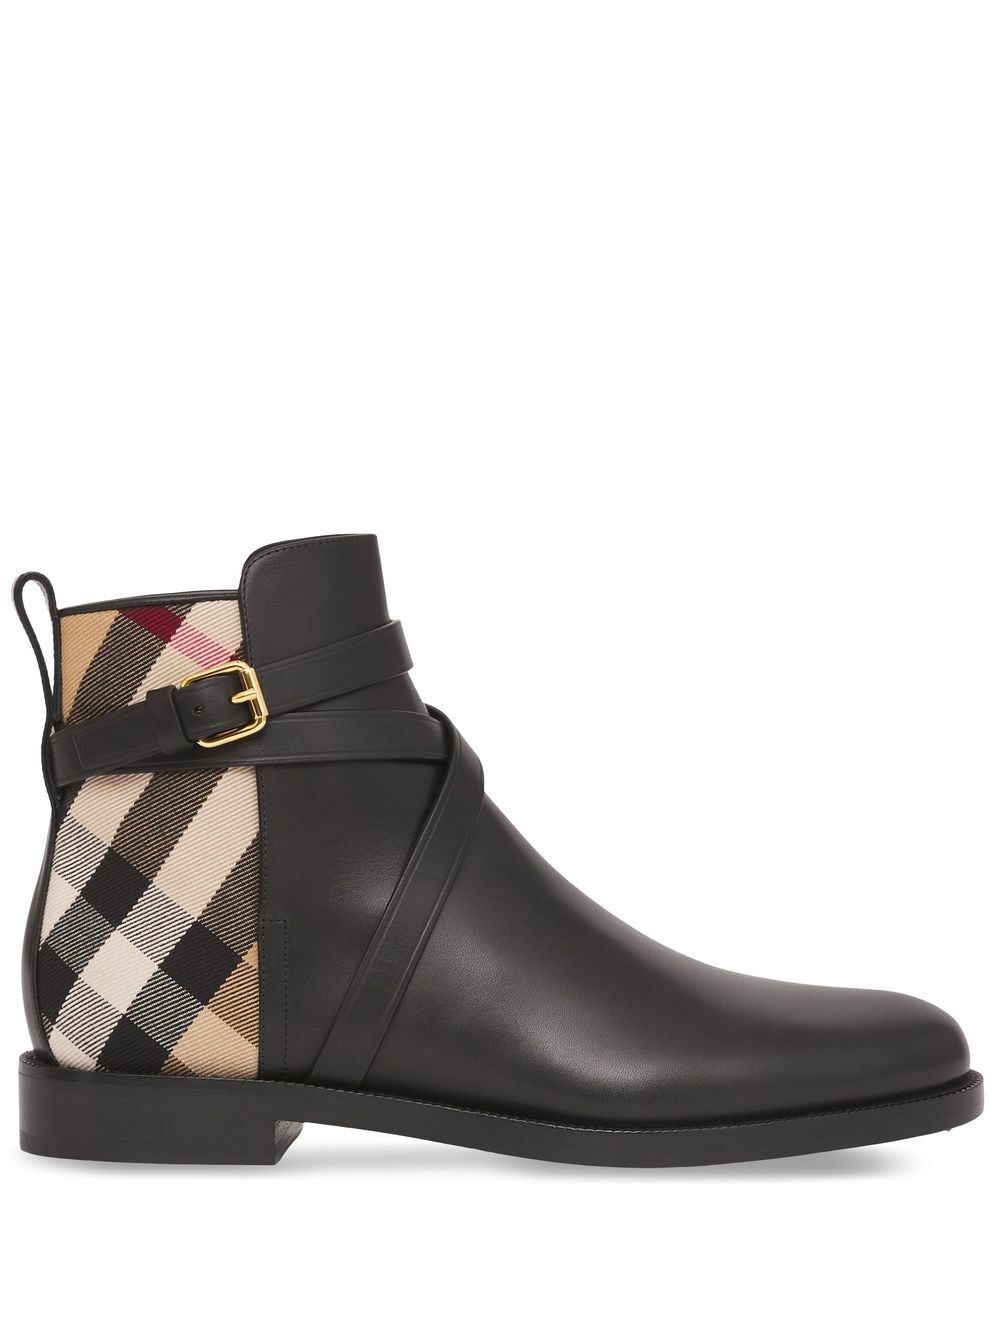 Burberry House Check leather ankle boots - Black